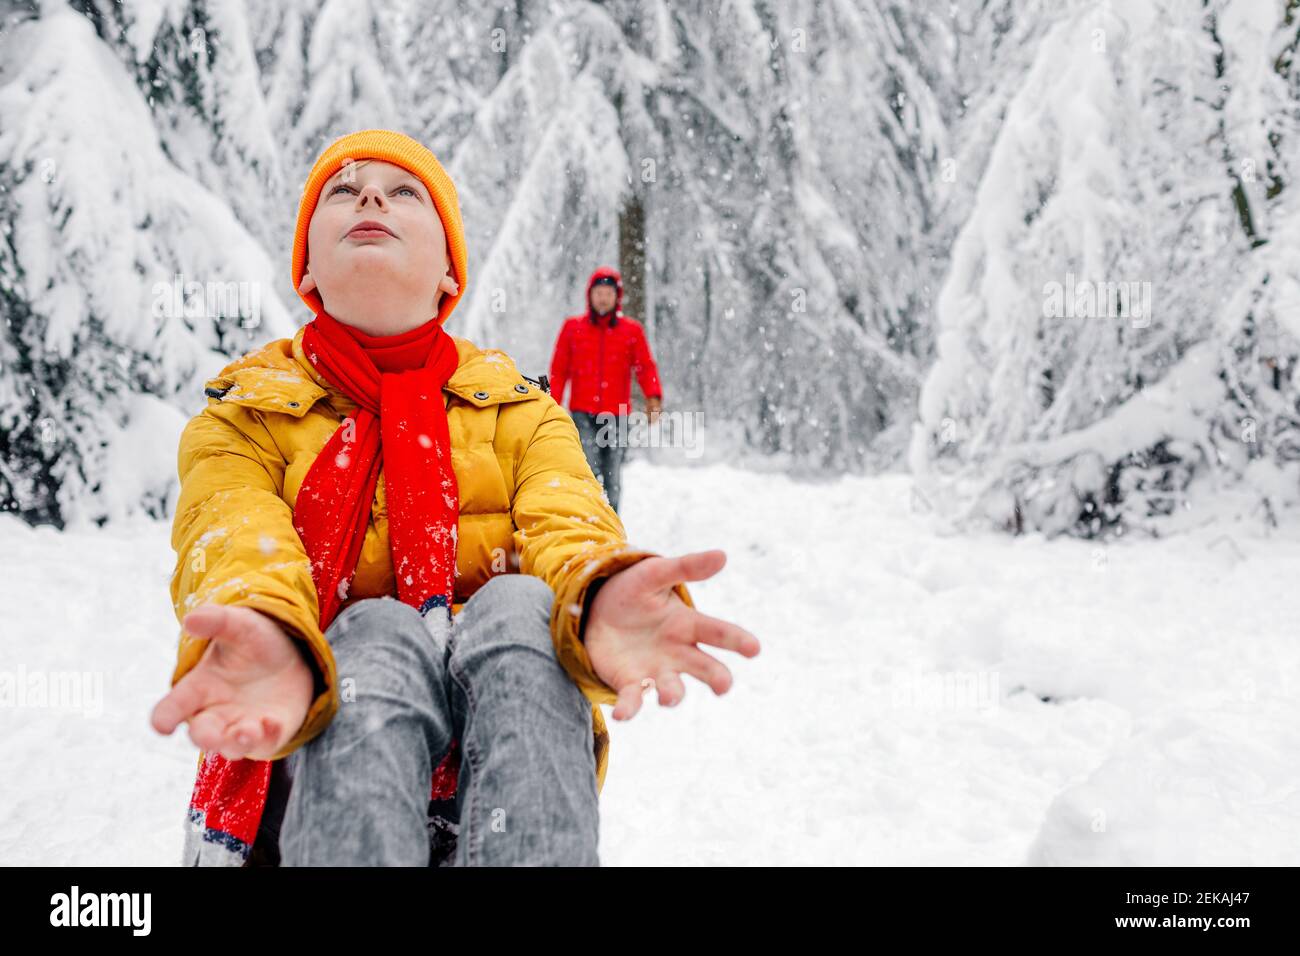 Boy looking up while sitting with man in background at forest during snowing Stock Photo